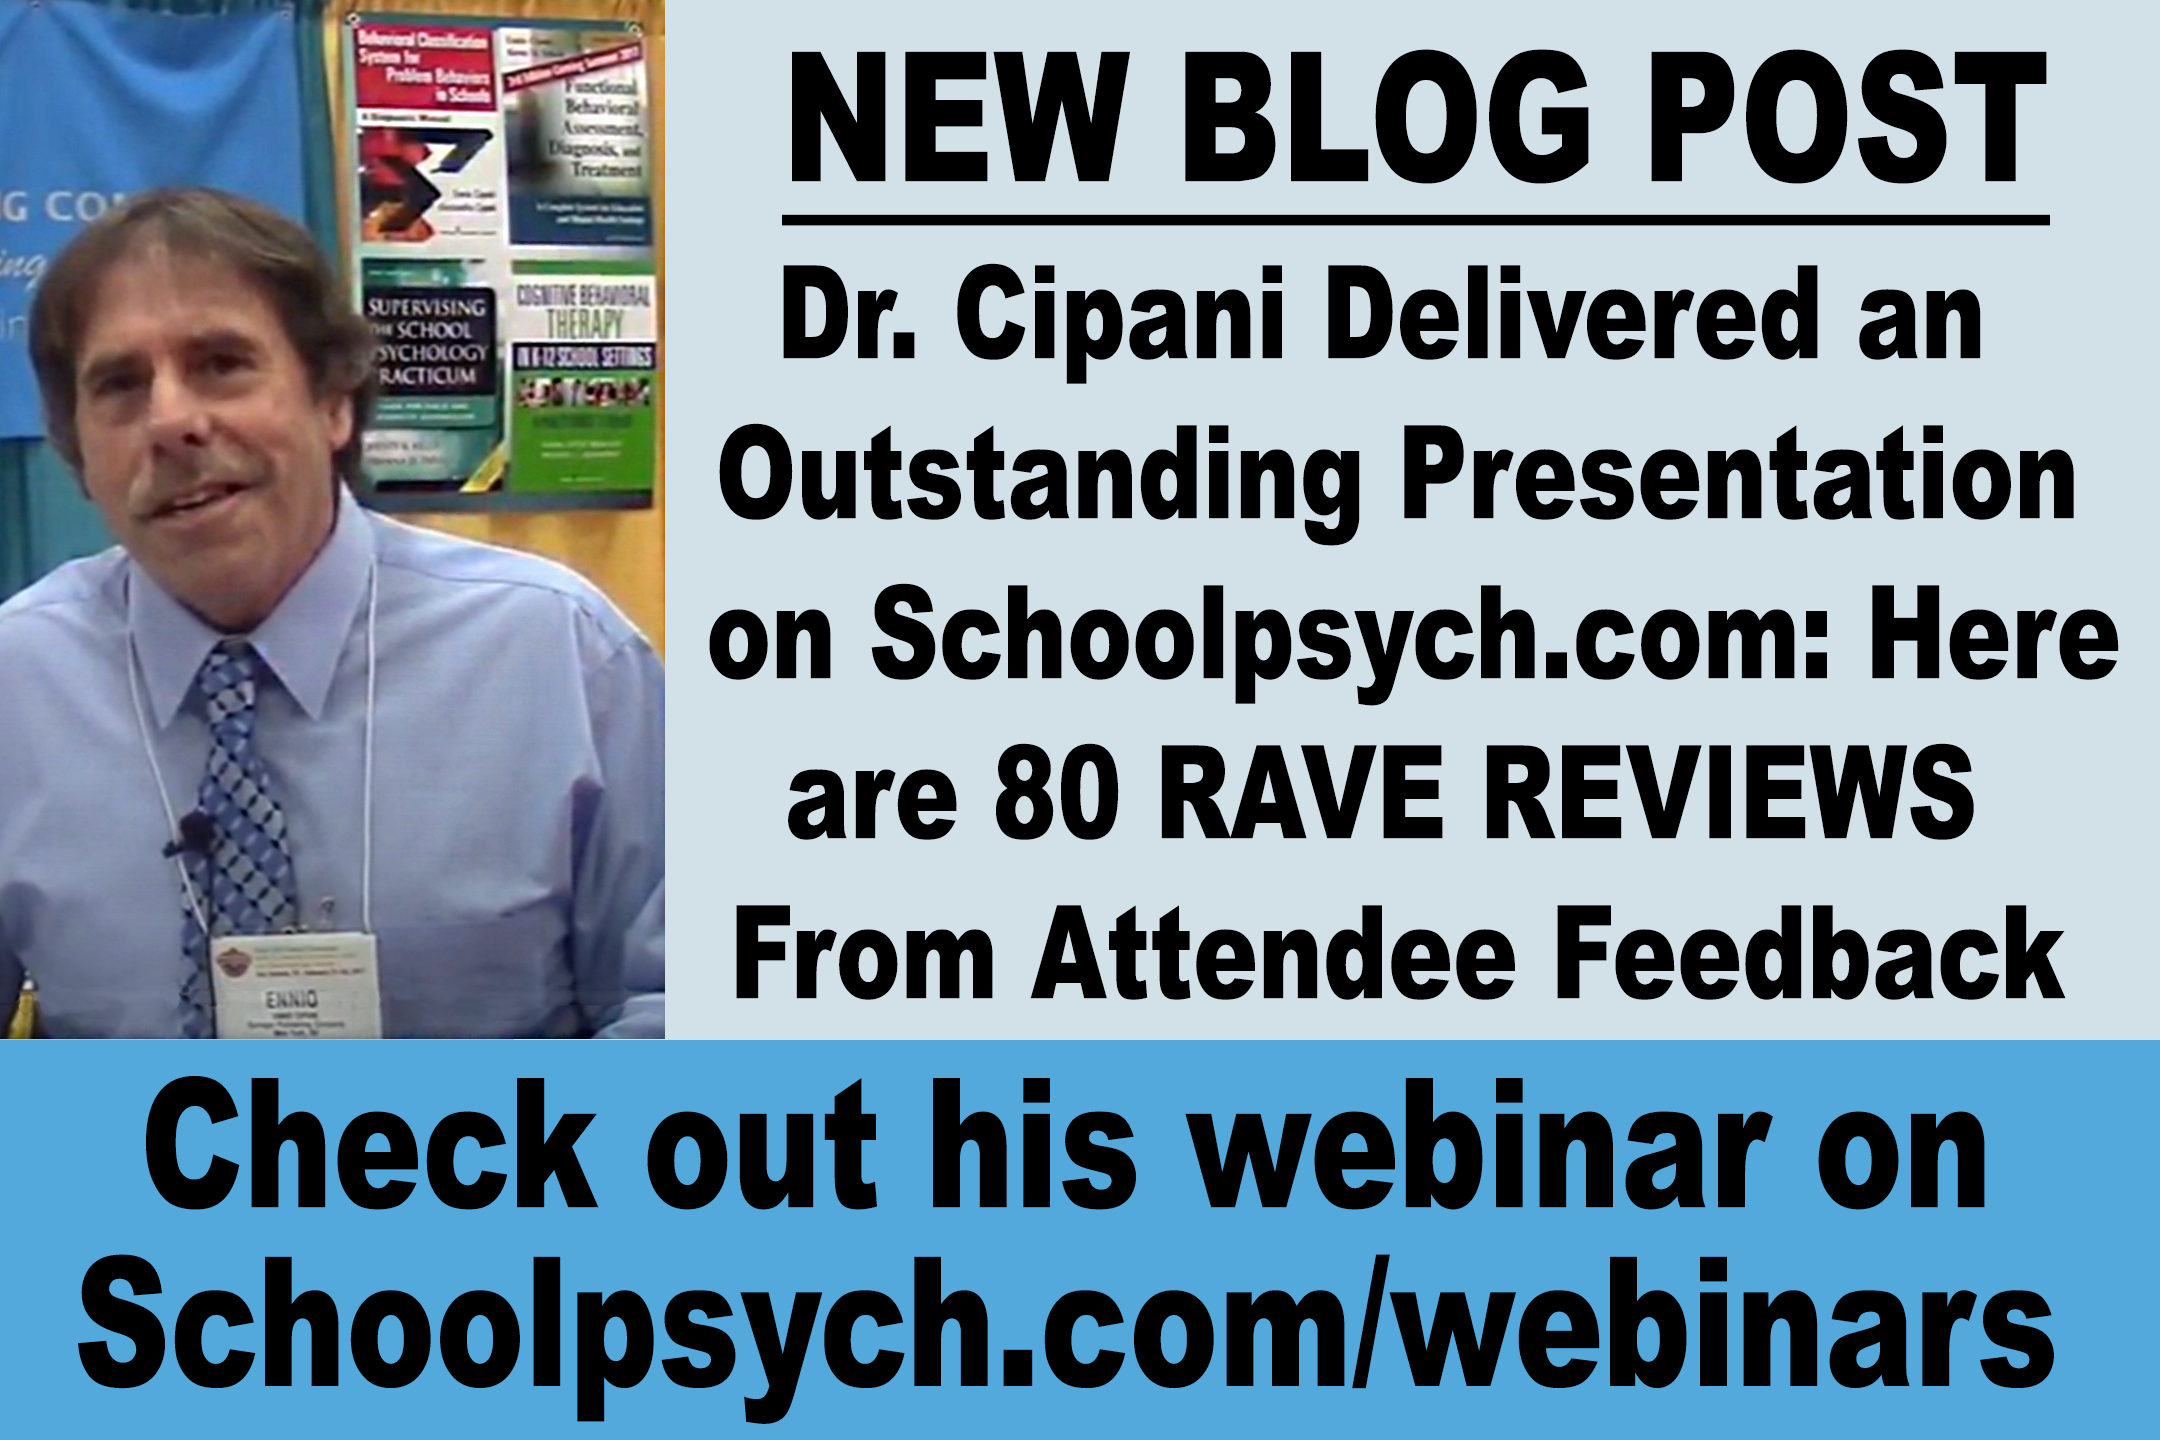 You are currently viewing Dr. Cipani Delivered an OUTSTANDING Presentation on Schoolpsych.com: Here are 80 RAVE REVIEWS From Attendee Feedback